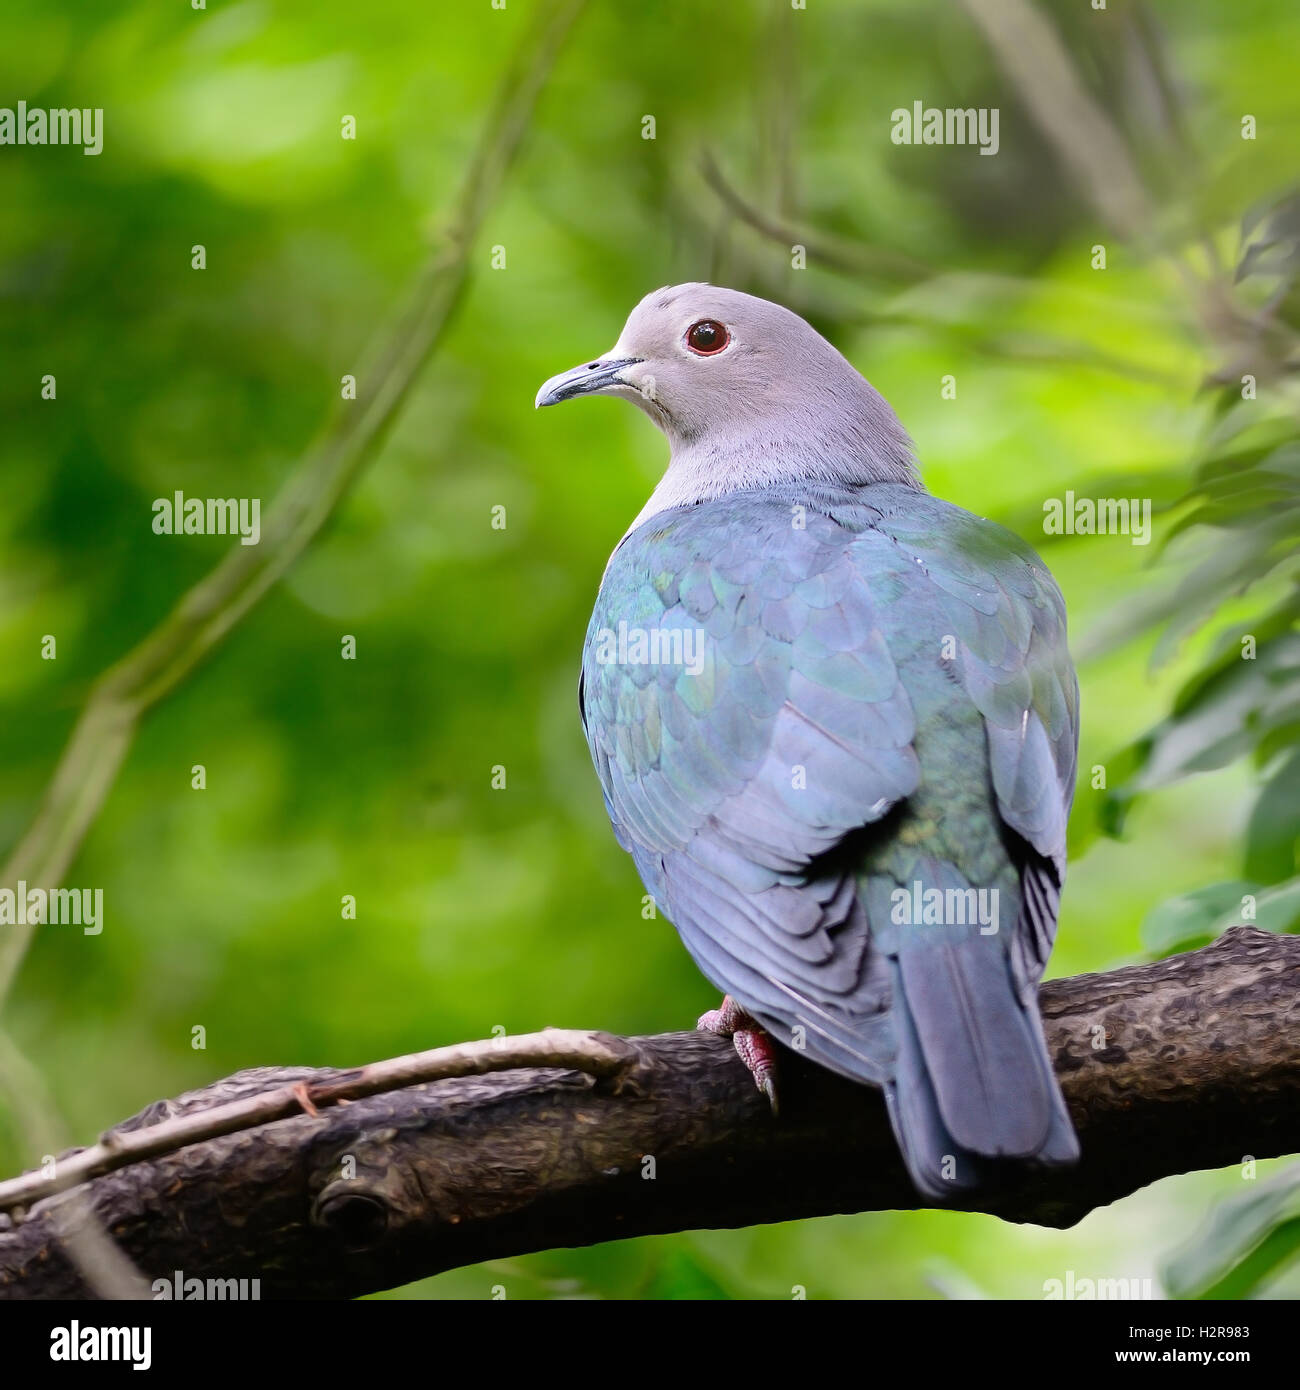 Green Imperial Pigeon Foto Stock